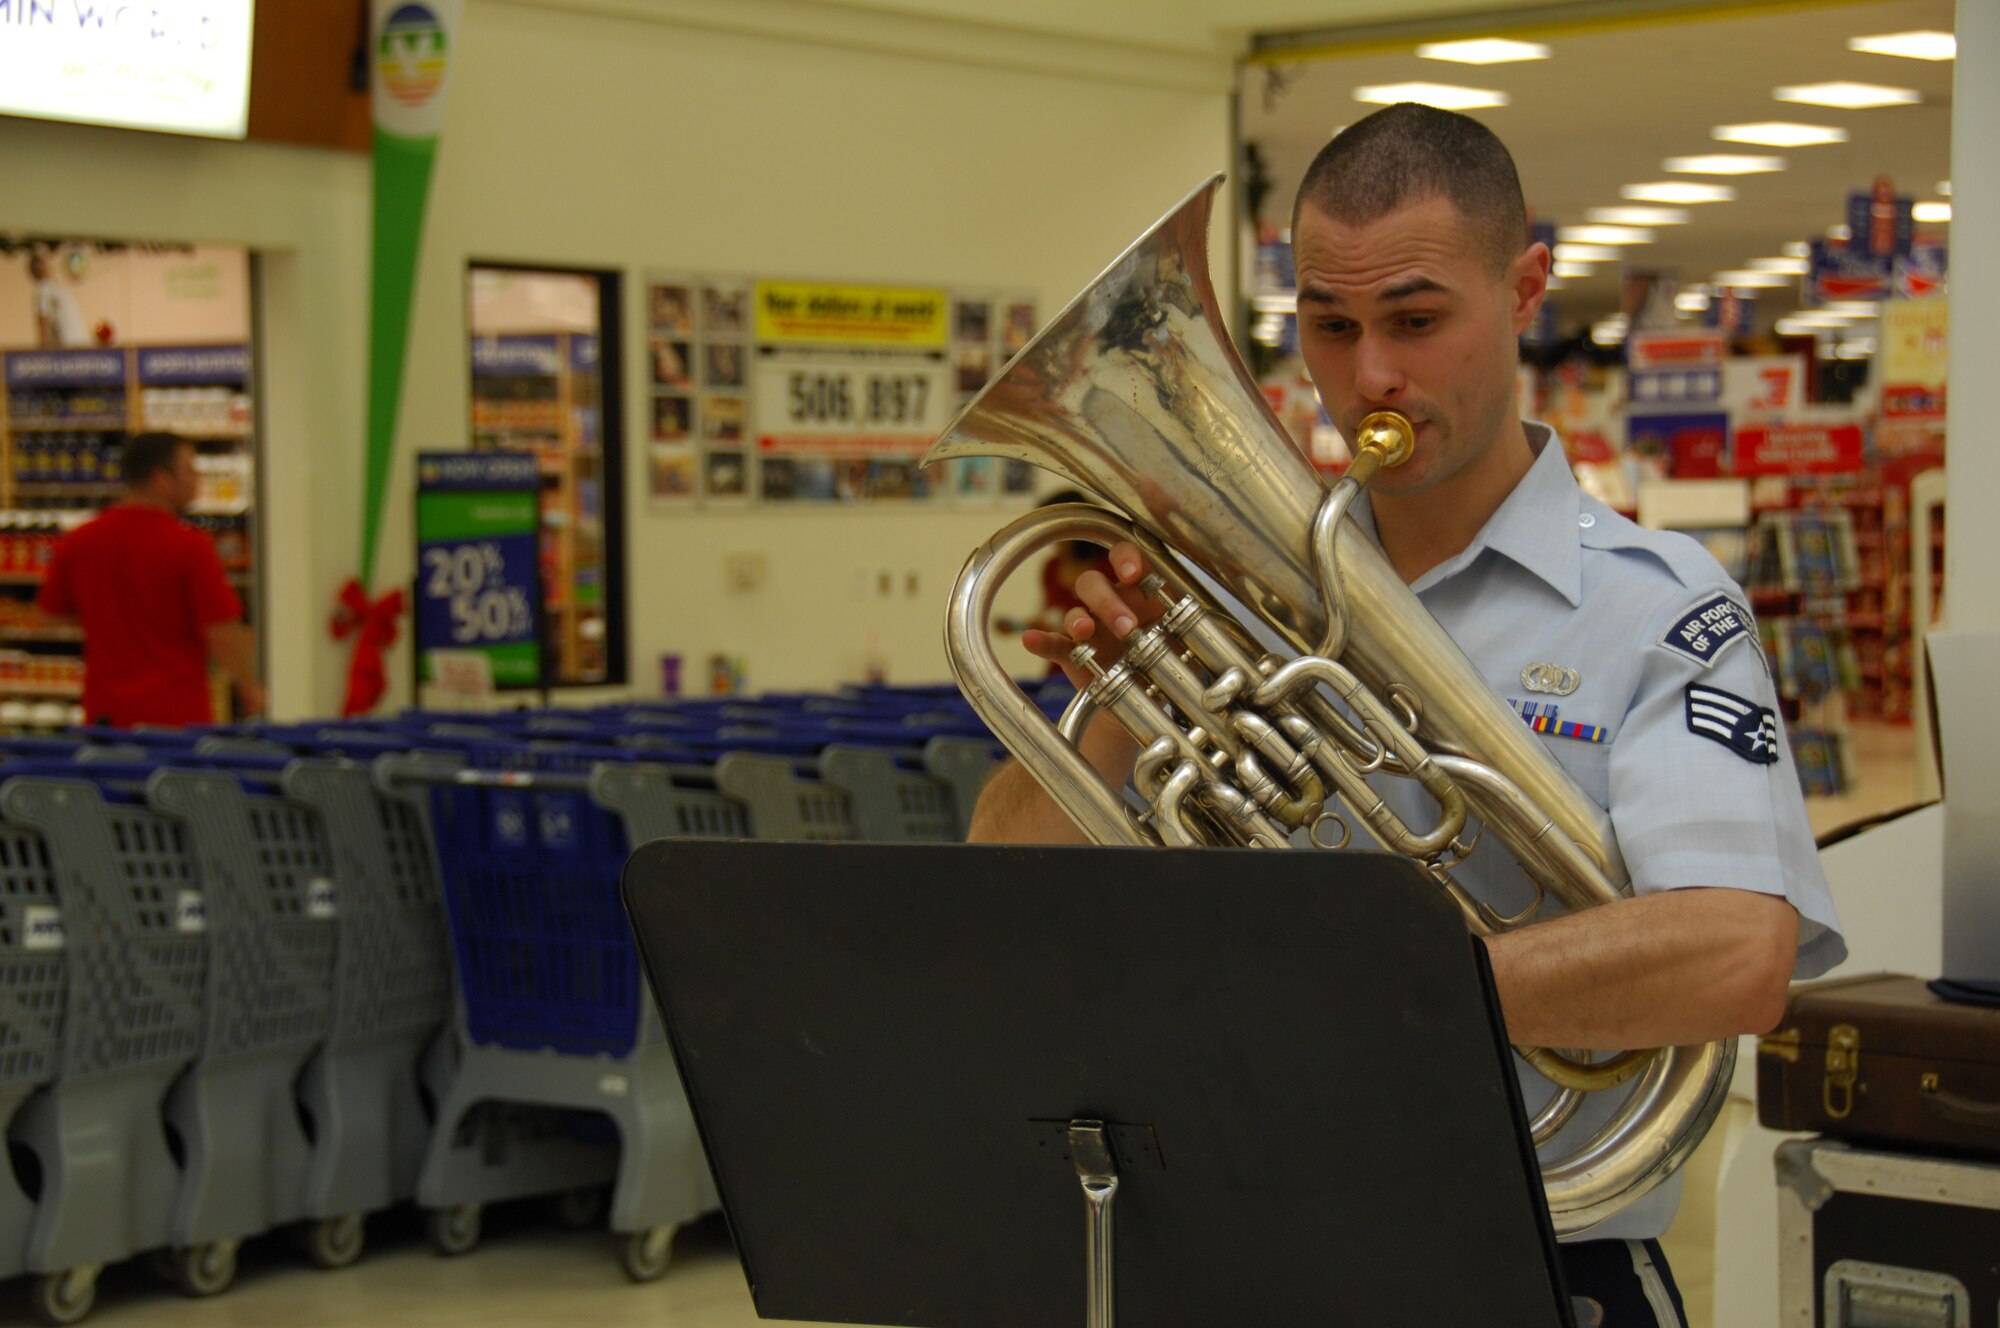 ANDERSEN AIR FORCE BASE, Guam - Senior Airman George Father from the Band of the Pacific's Alaska Brass, plays the French horn during a performance at the Base Exchange here Dec. 15. This was the first performance on the Alaska Brass' tour of Guam. (U.S. Air Force photo by Senior Airman Jonathan Hart)